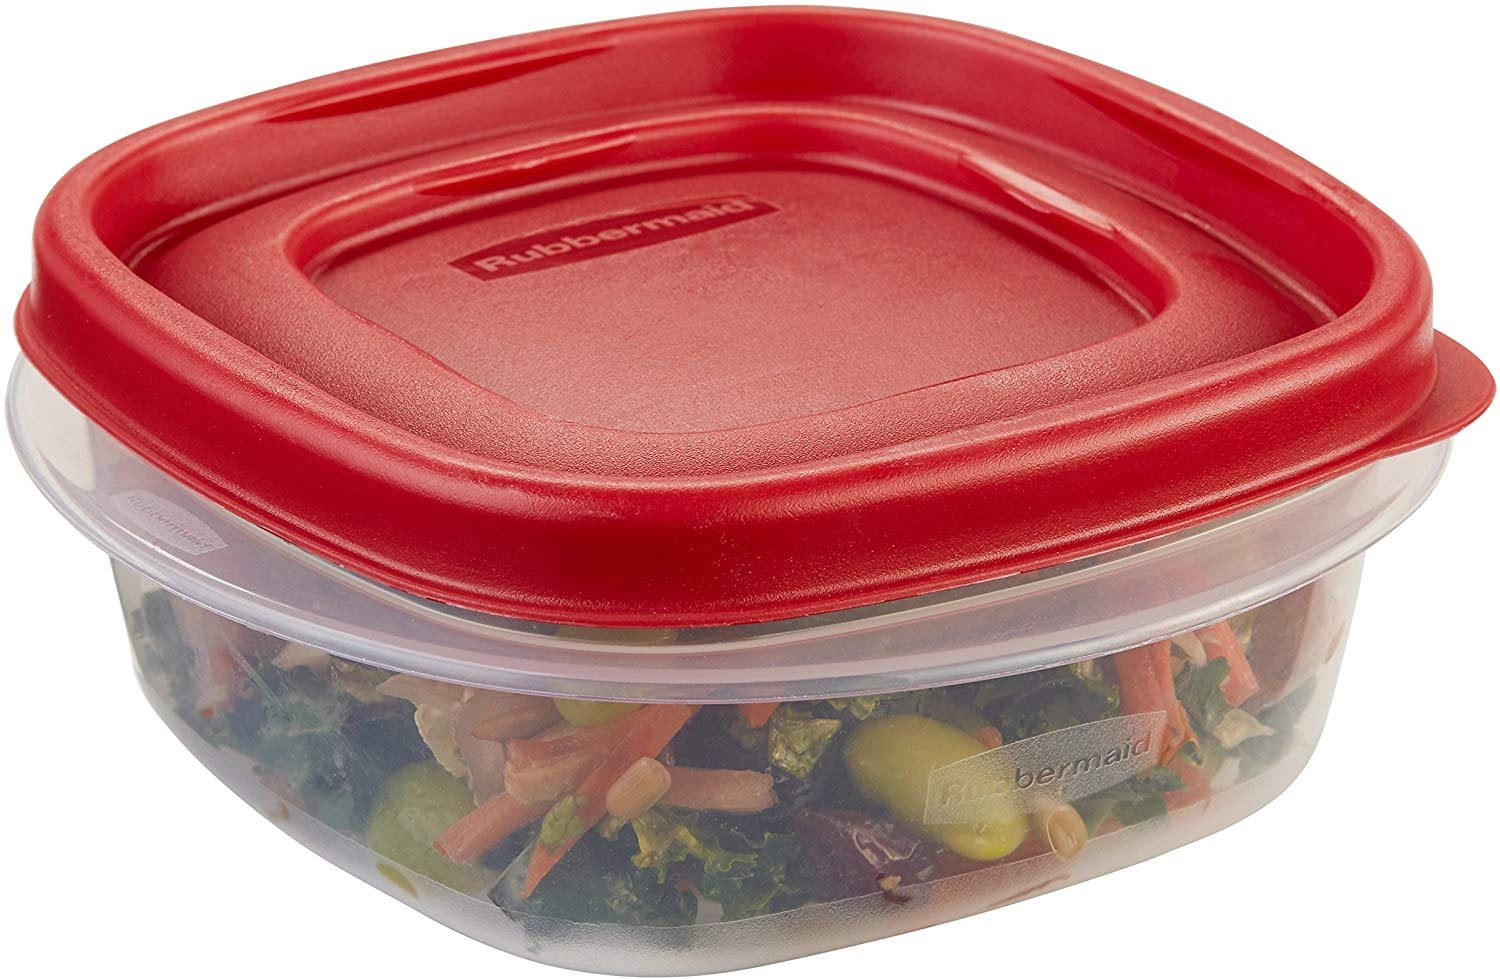 Rubbermaid Lock-Its Square Food Storage Container with Easy Find Lid, 2  Cup, Racer Red